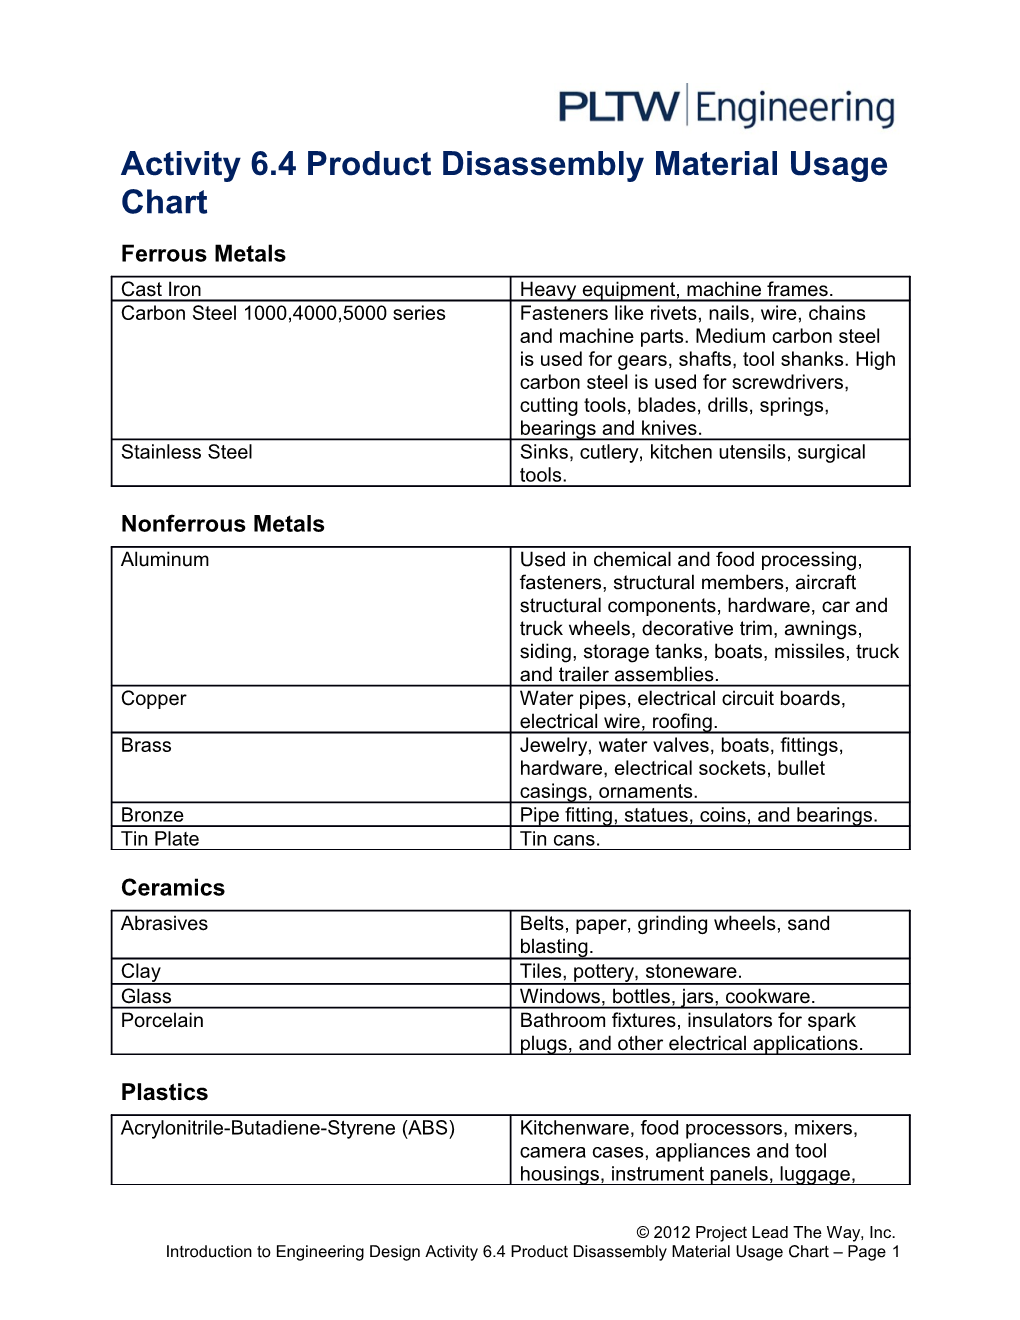 Activity 6.4 Product Disassembly Material Usage Chart